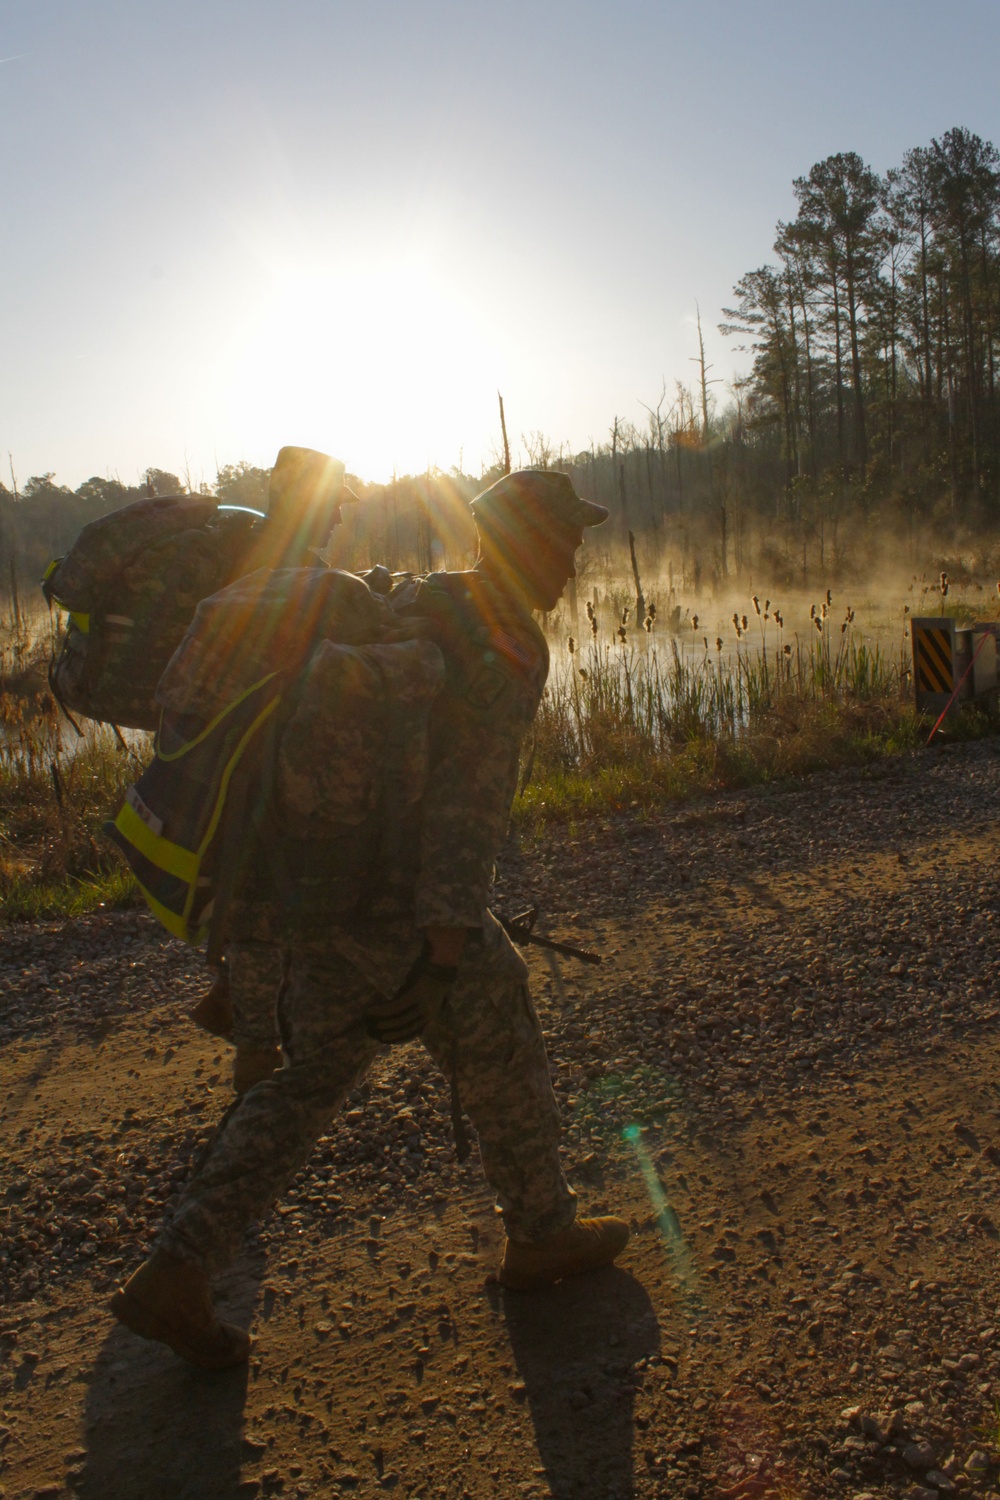 Ruck march at dawn